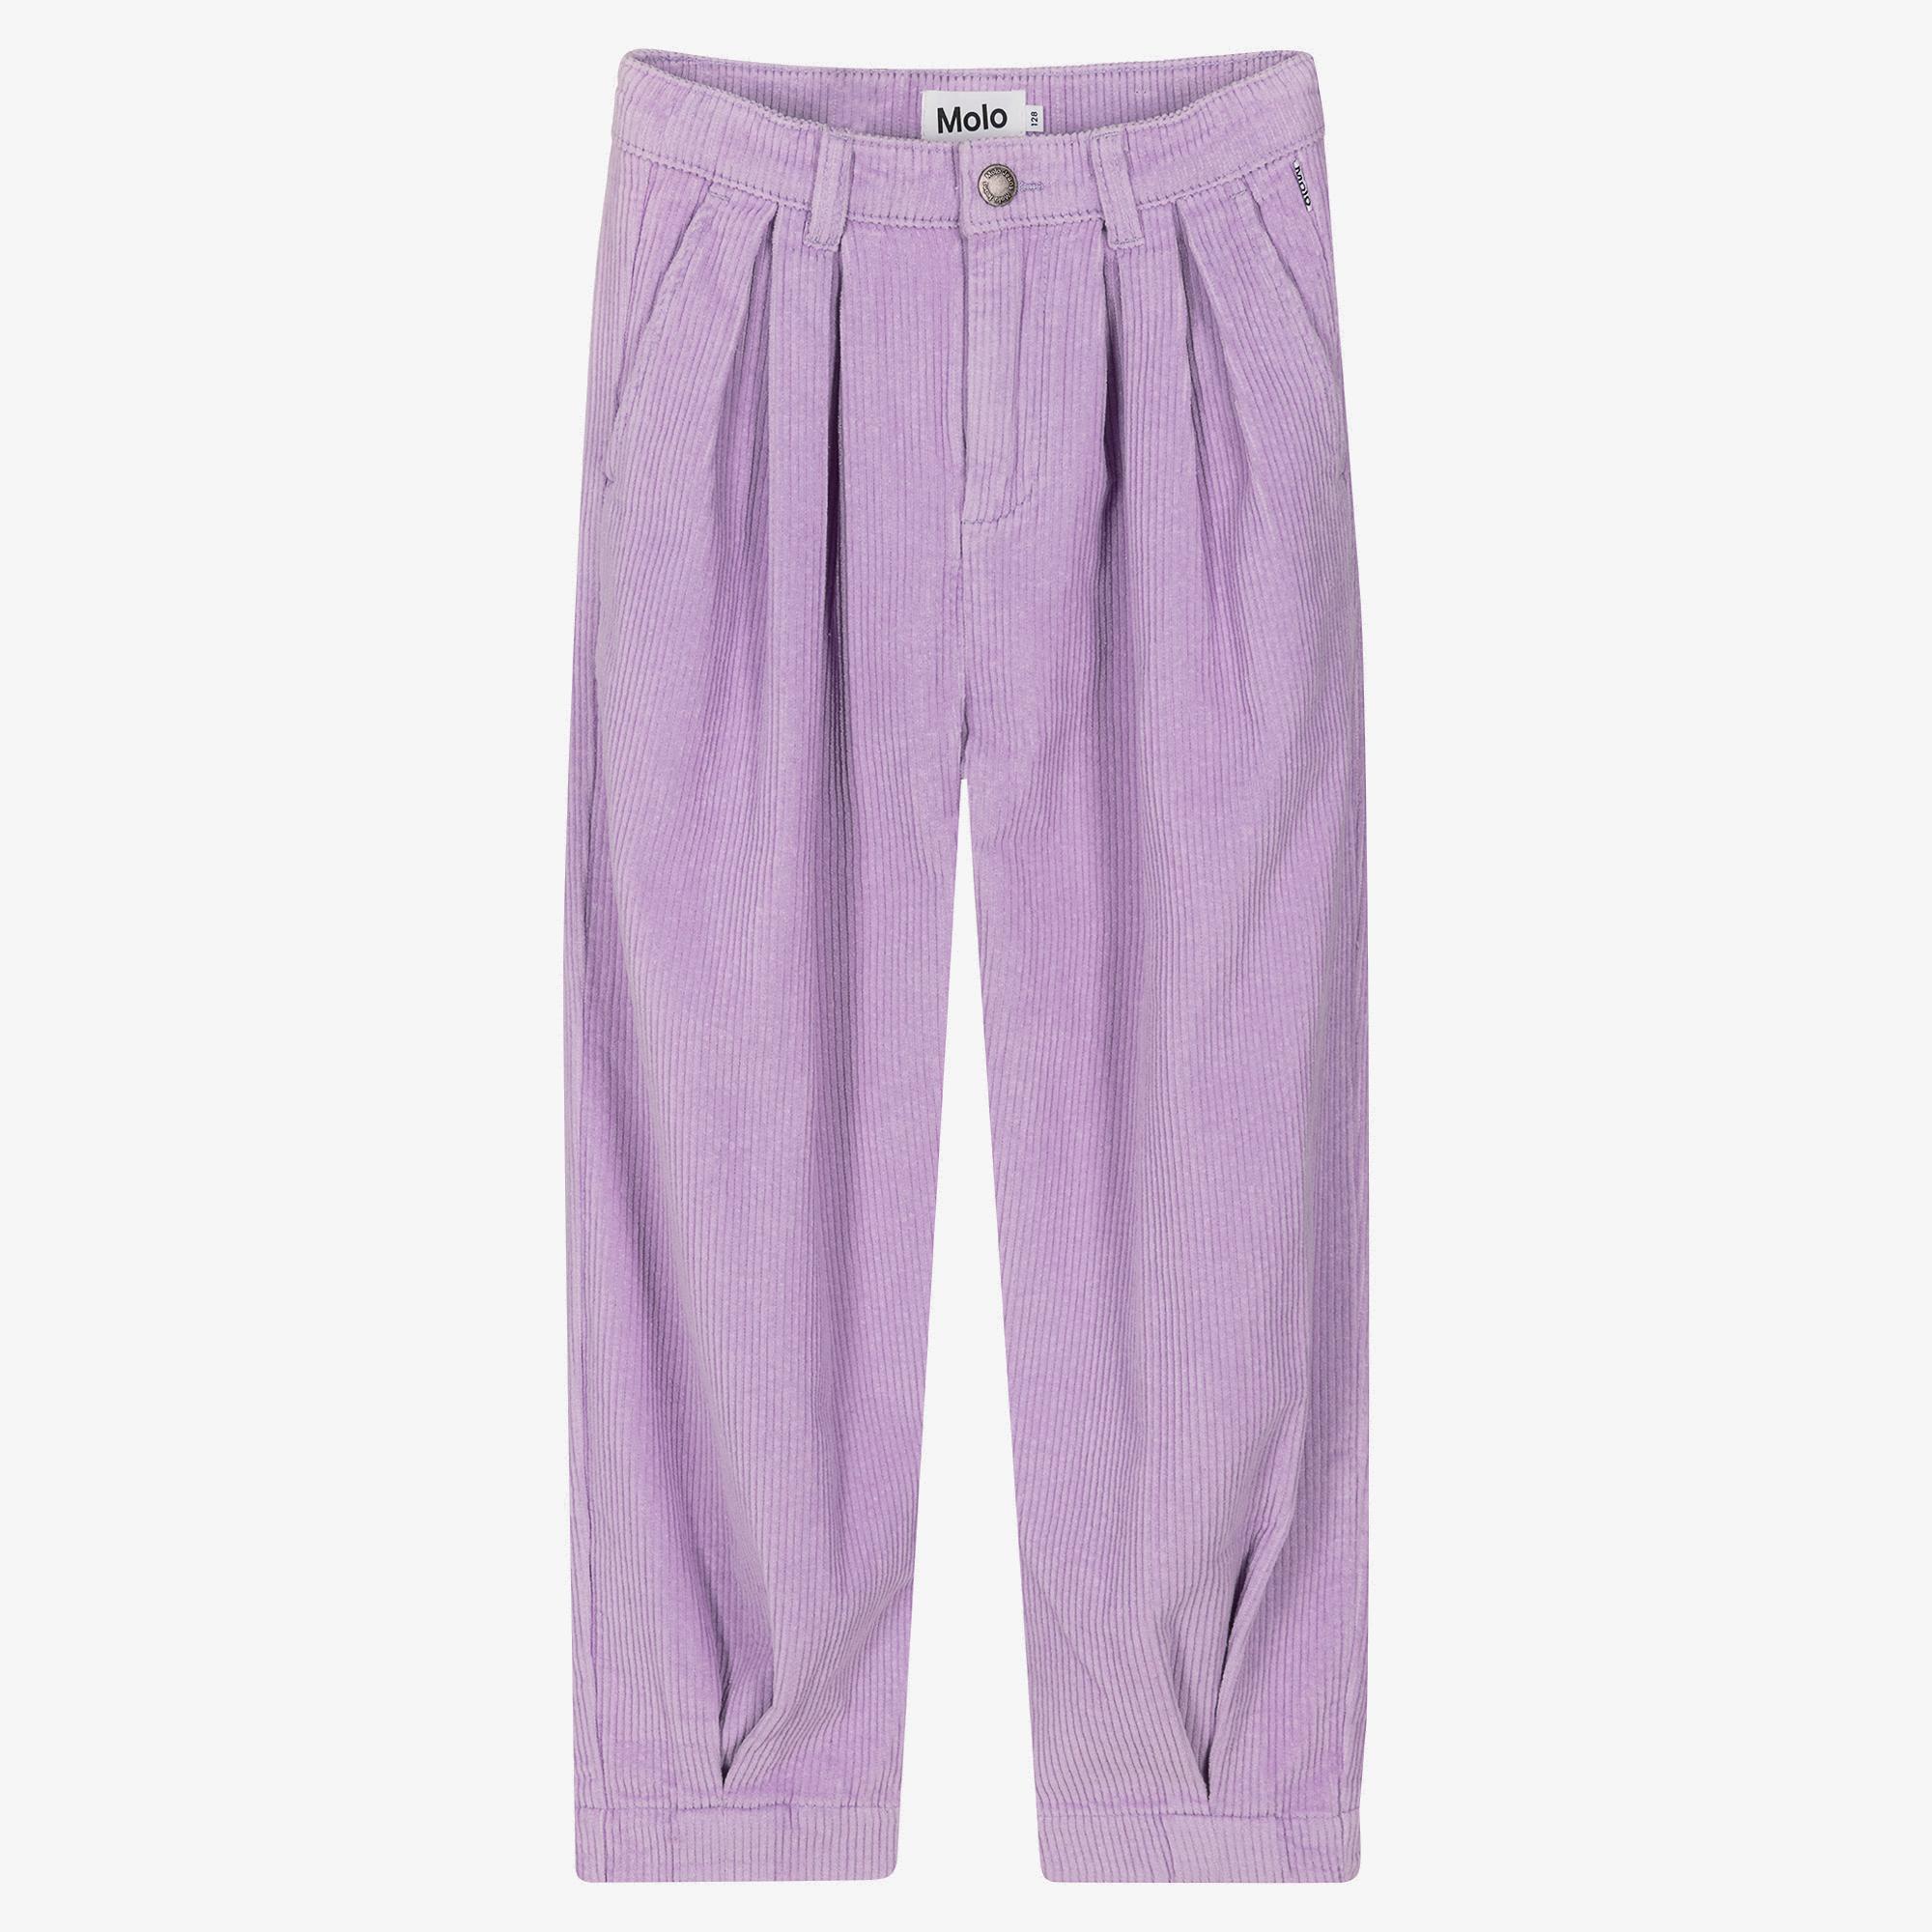  Other Stories cotton stretch corduroy trousers in purple  PURPLE  ASOS